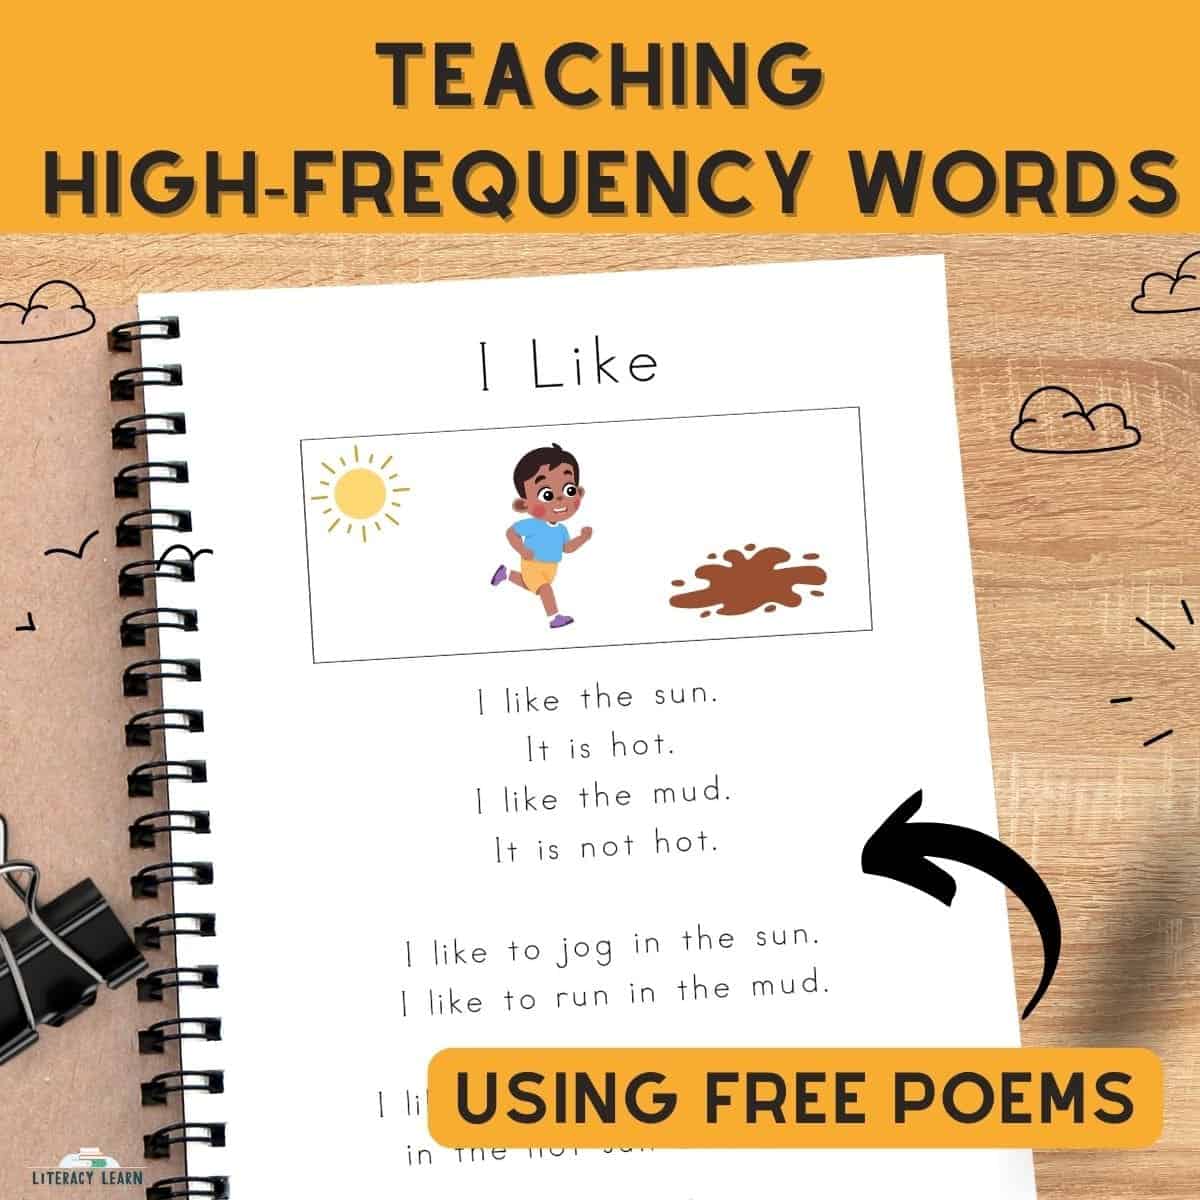 Graphic with student notebook showing poem with words "Teaching High-Frequency Words Using Free Poems."